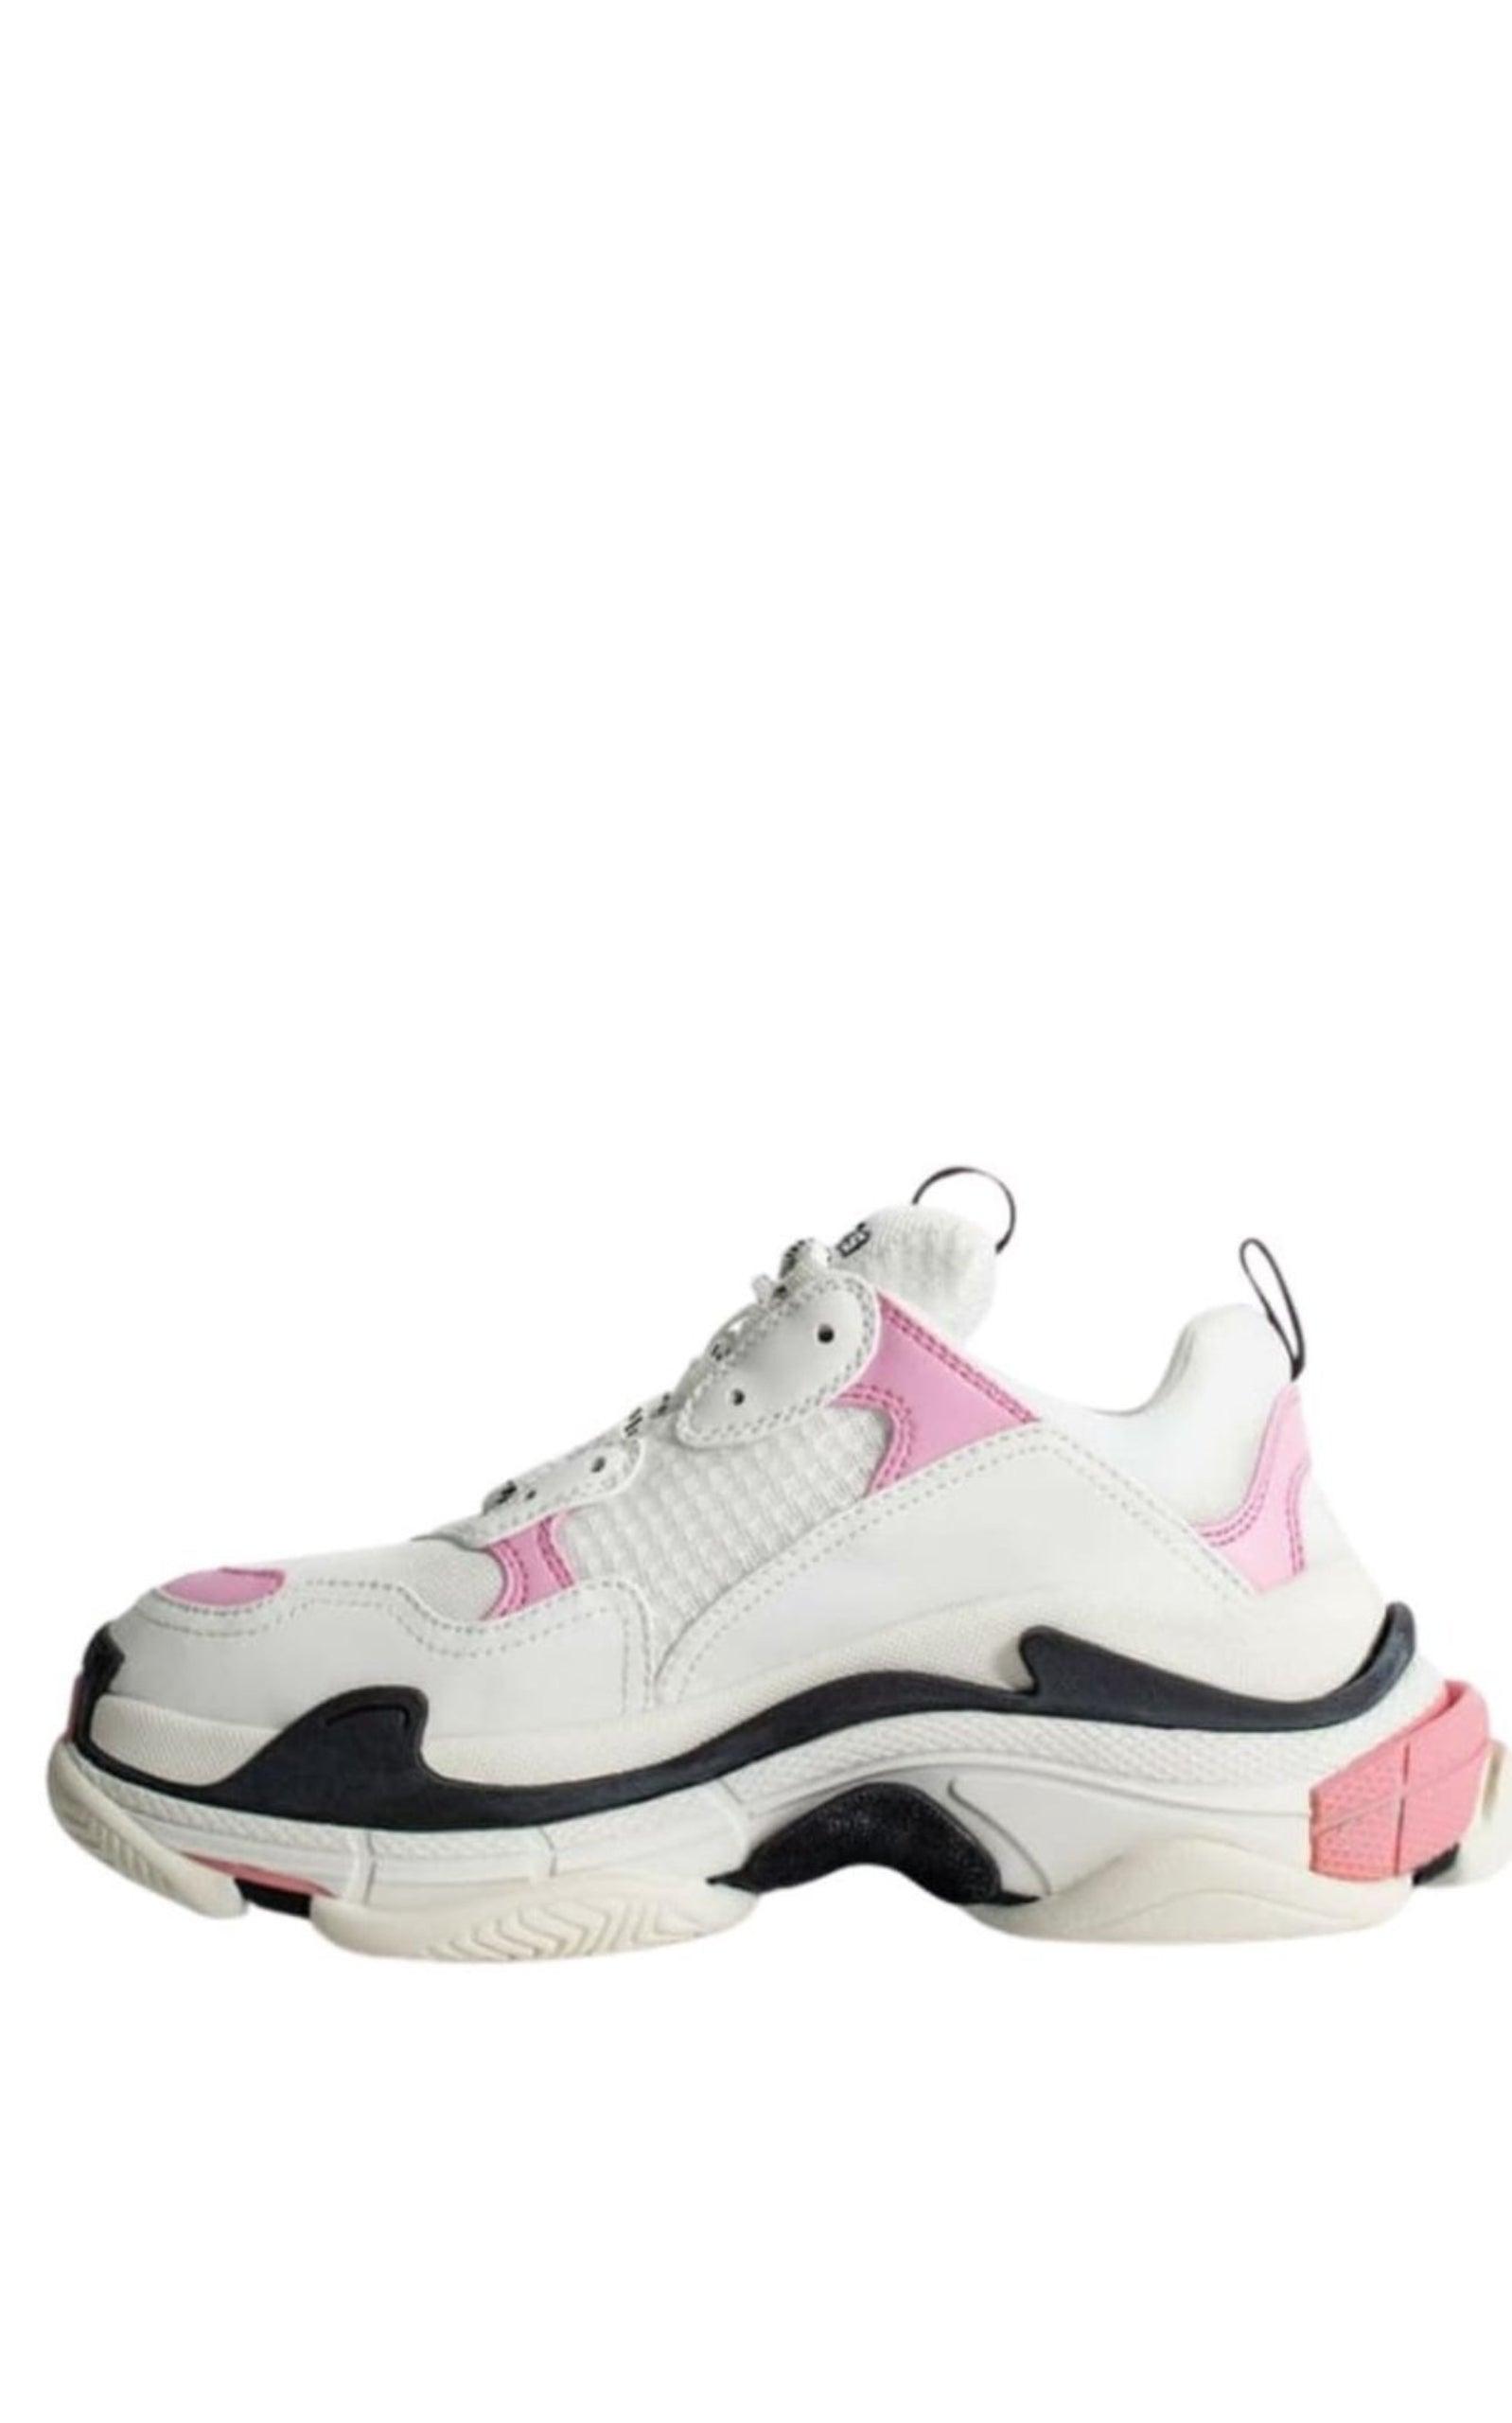 Bred vifte Ærlighed Staple Balenciaga Triple S leather and Mesh Sneakers | Runway Catalog